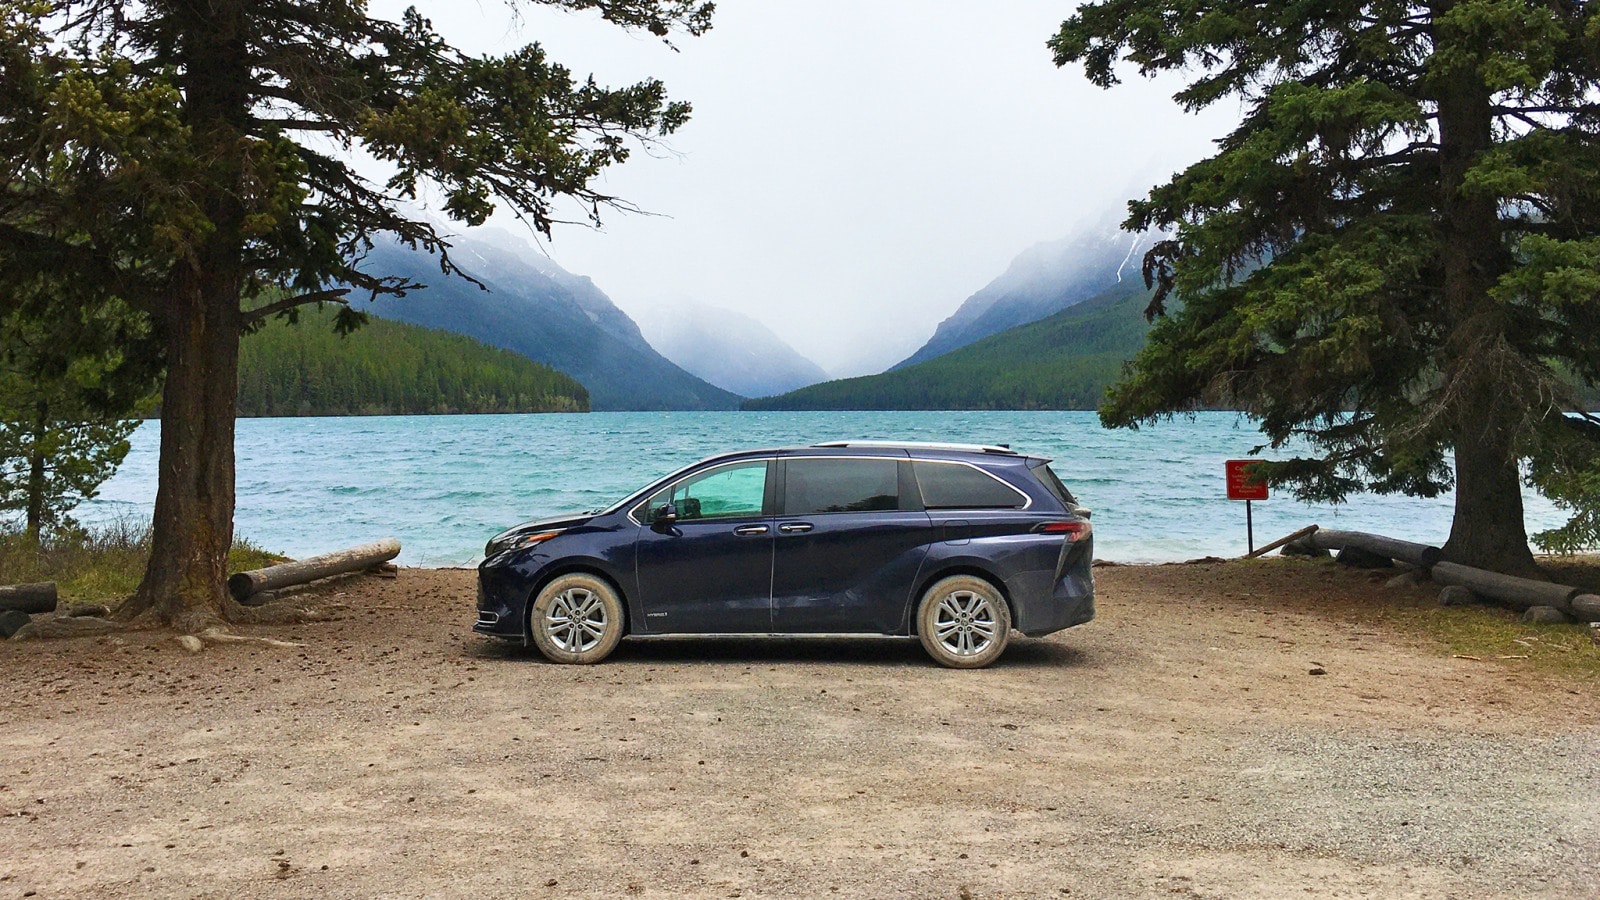 2021 Toyota Sienna Real-World Test: What's it Like on a 3,000-Mile Road Trip?